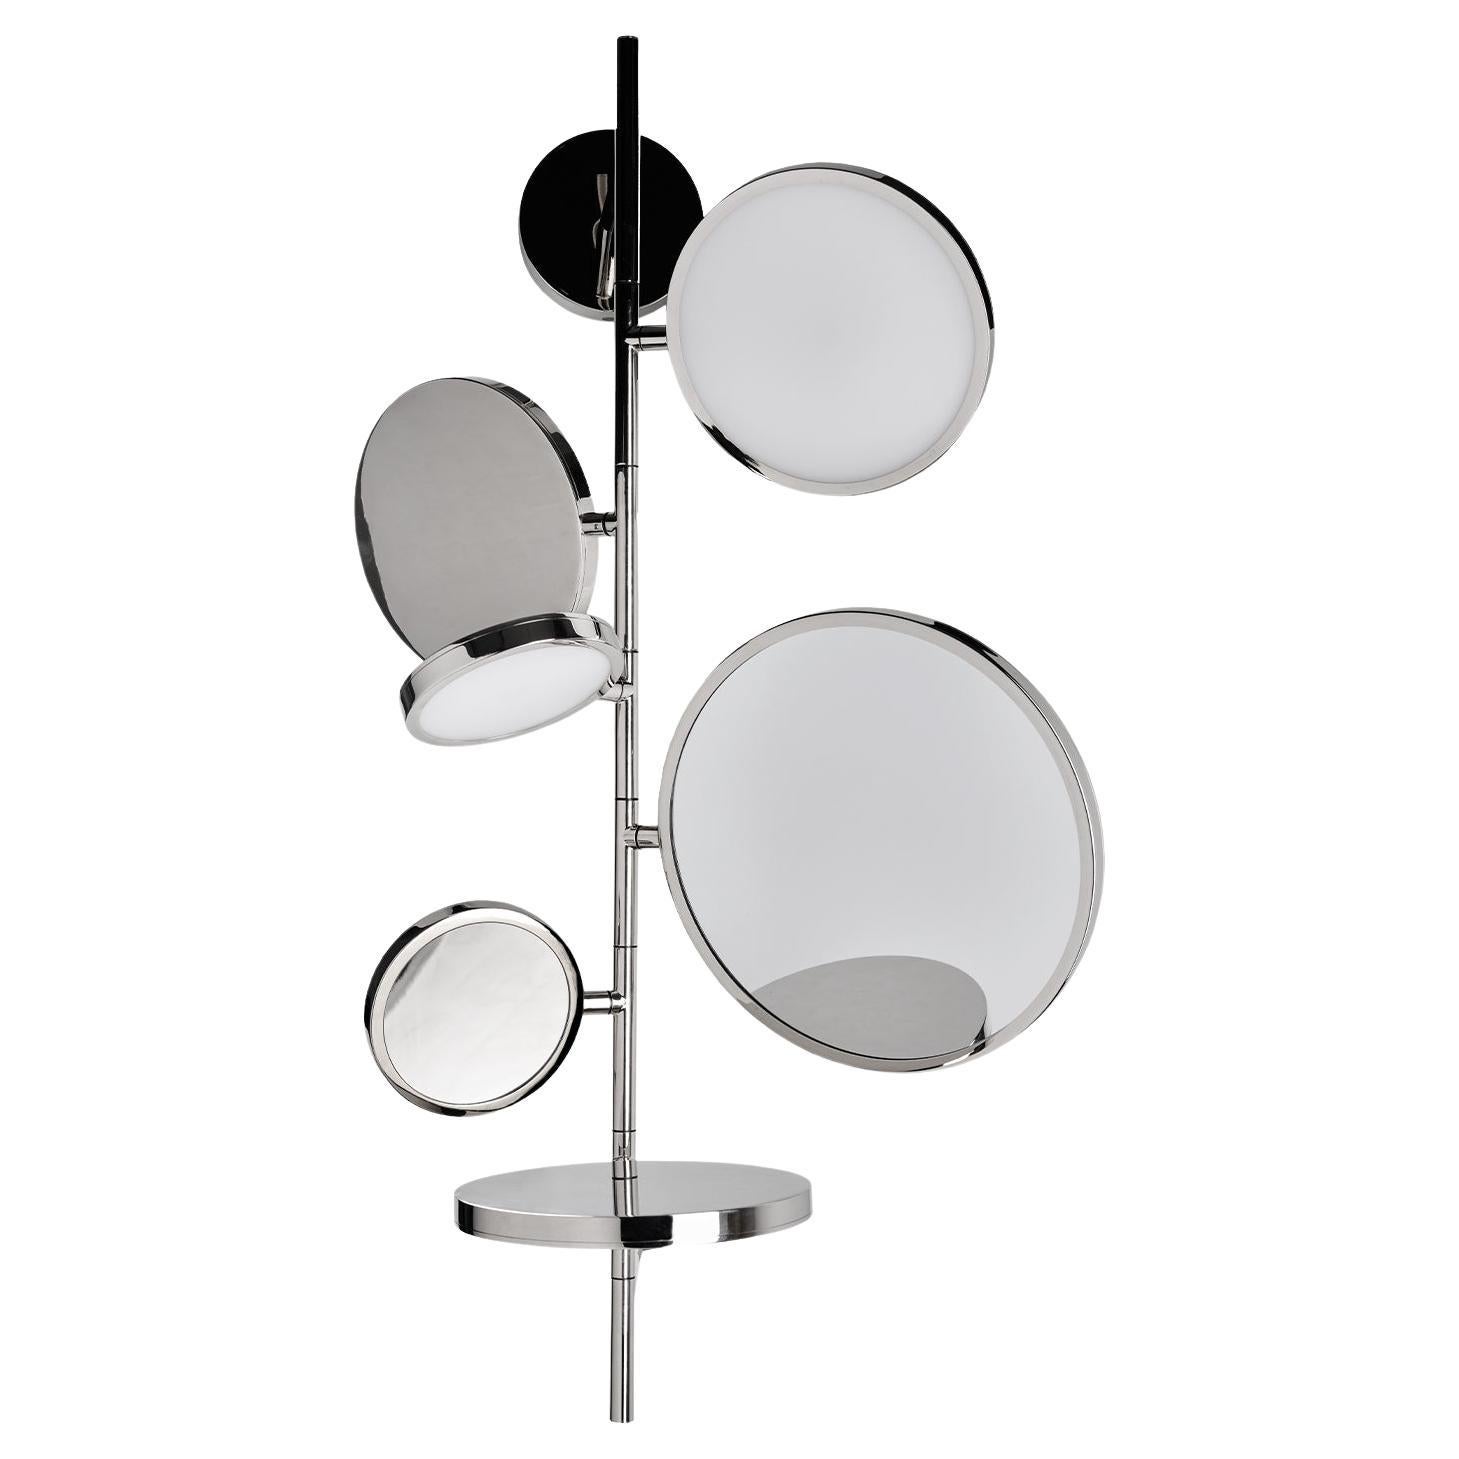 DCW Editions Tell Me Stories Mirror Light in Silver by Giulia Liverani For Sale